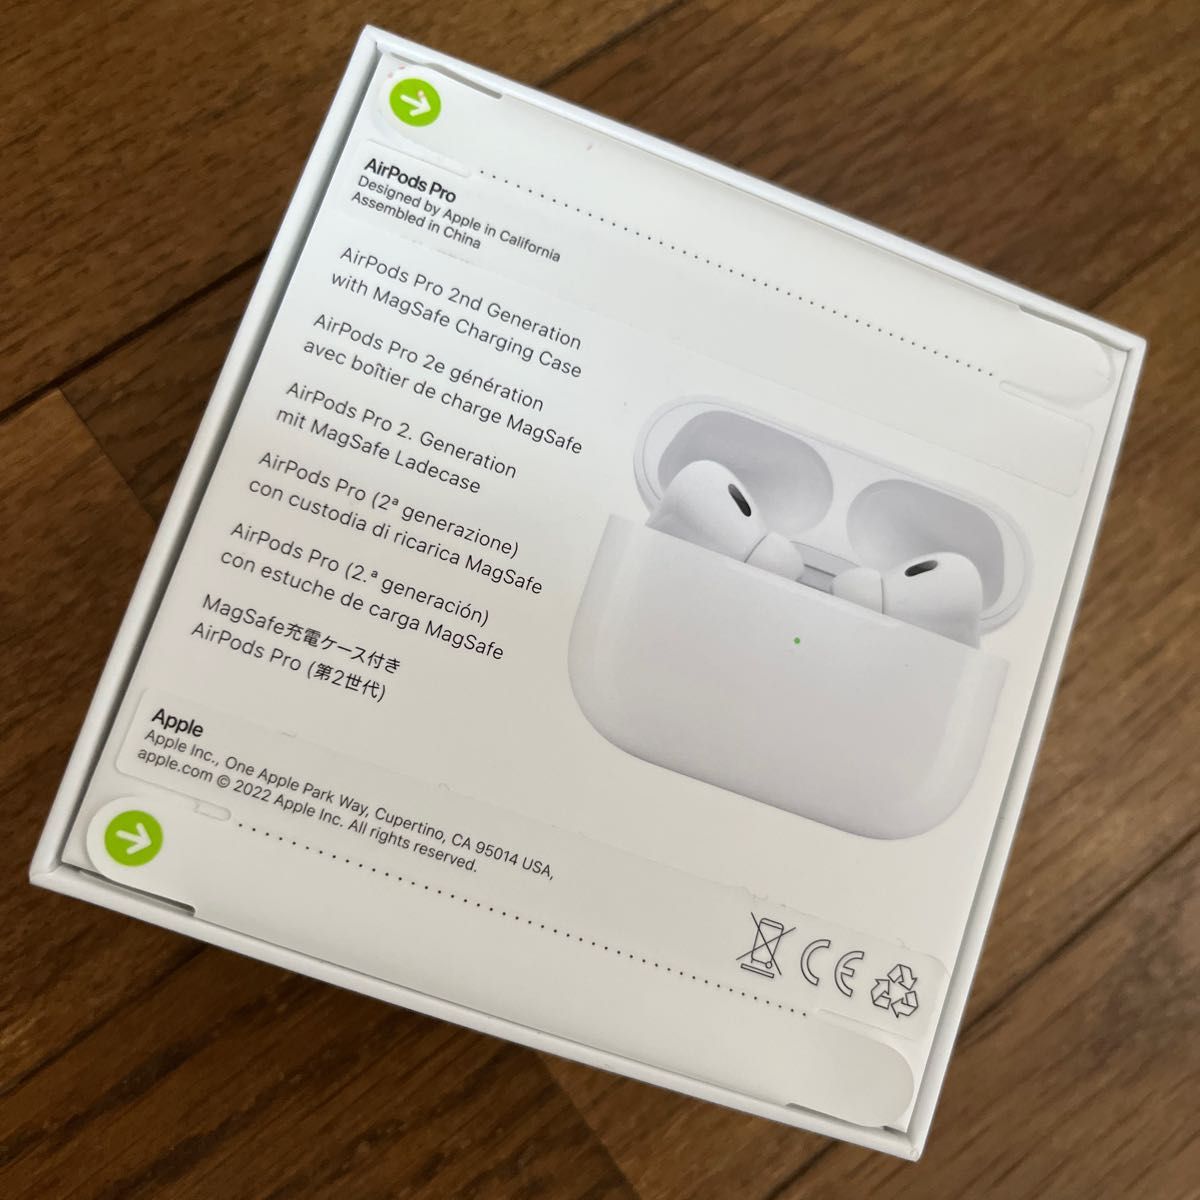 AirPods Pro 第2世代 新品未使用｜PayPayフリマ